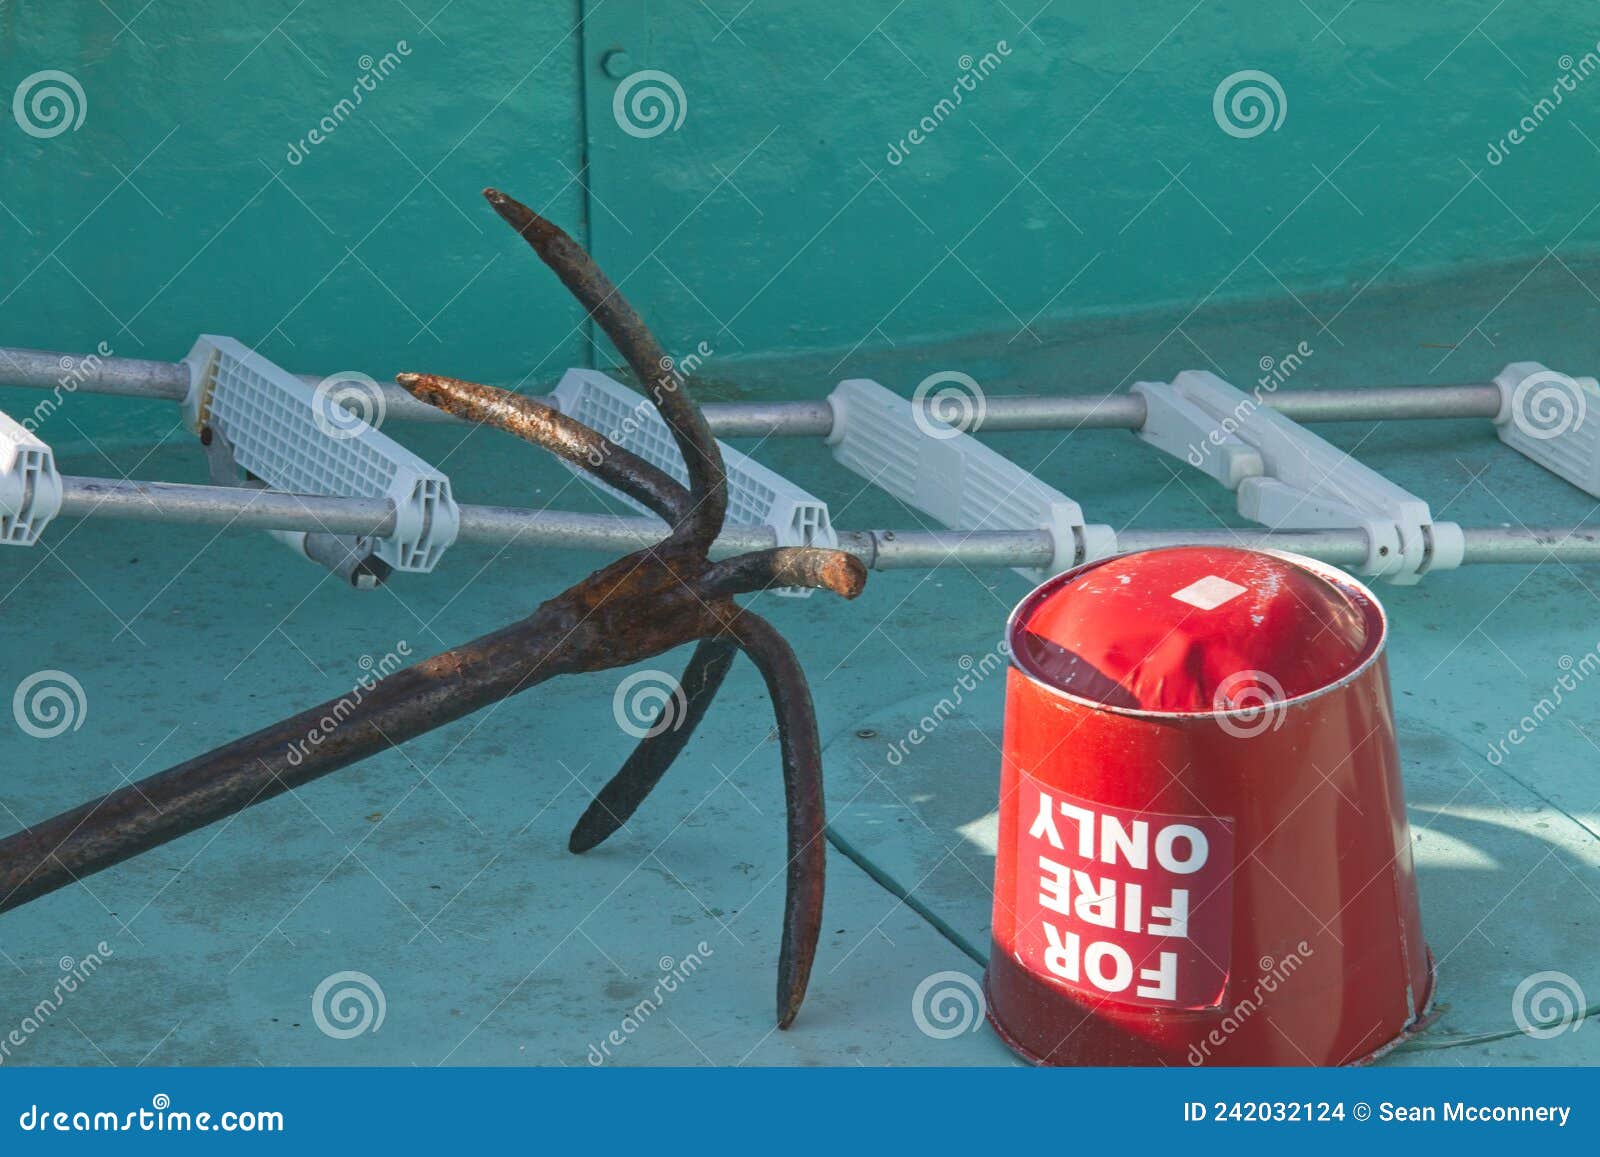 Items You May Find on a Fishing Boat. Stock Photo - Image of pale, sean:  242032124